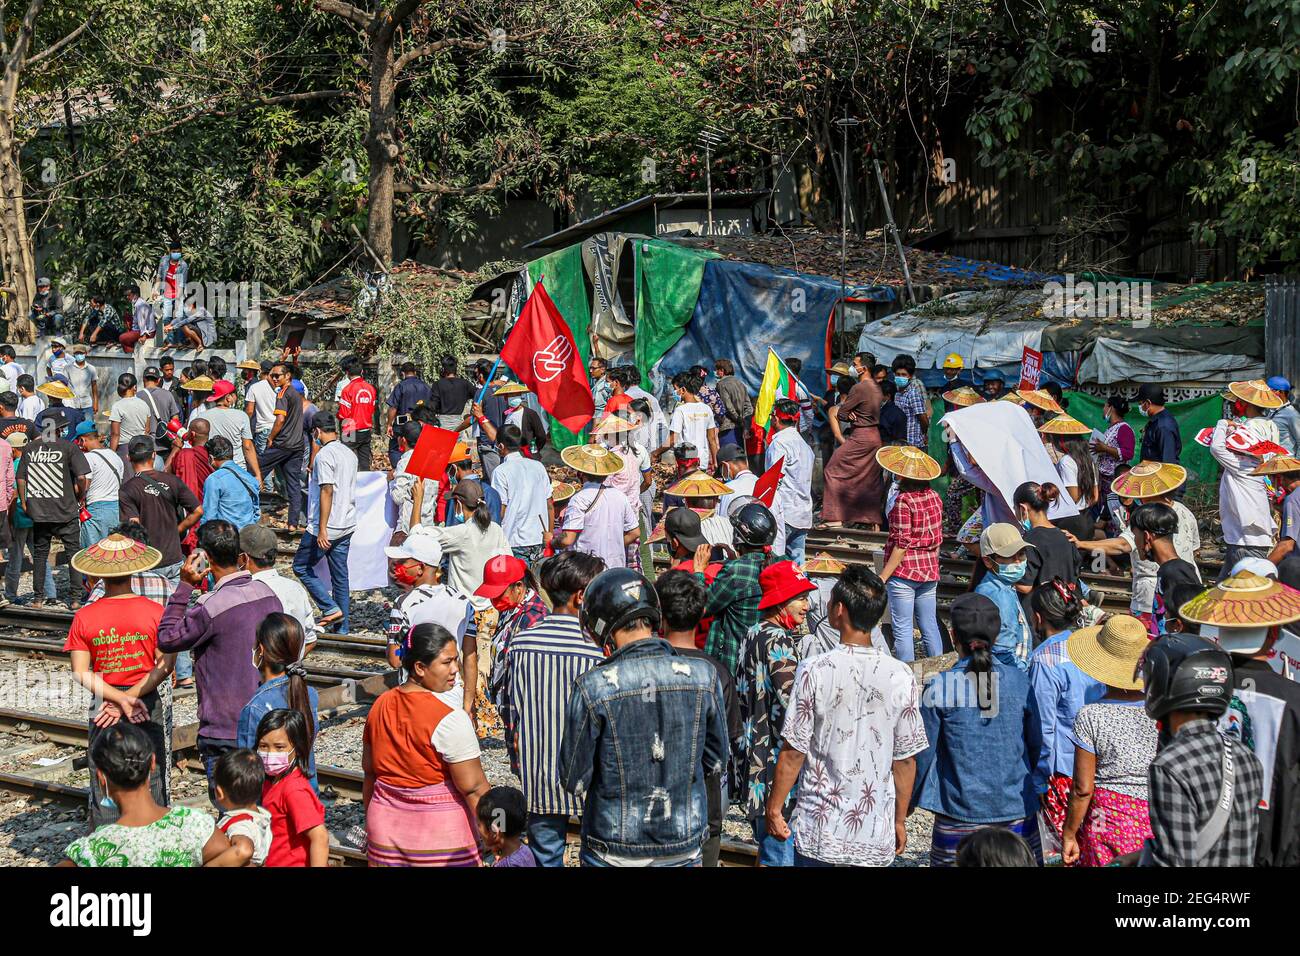 Protesters seen gathered in the middle of the railway during the protest.Anti-military coup protesters occupied train tracks near employee housing at the city's central railway in Myanmar's second-largest city, Mandalay, to protest against the military coup. After several hours police fired 40 real bullets shots toward protesters and sprayed tear gas to disperse the crowd during the 12th day of protest against the military takeover on 1st February 2021. Myanmar's military detained State Counsellor of Myanmar Aung San Suu Kyi on February 01, 2021 and declared a state of emergency while seizing Stock Photo